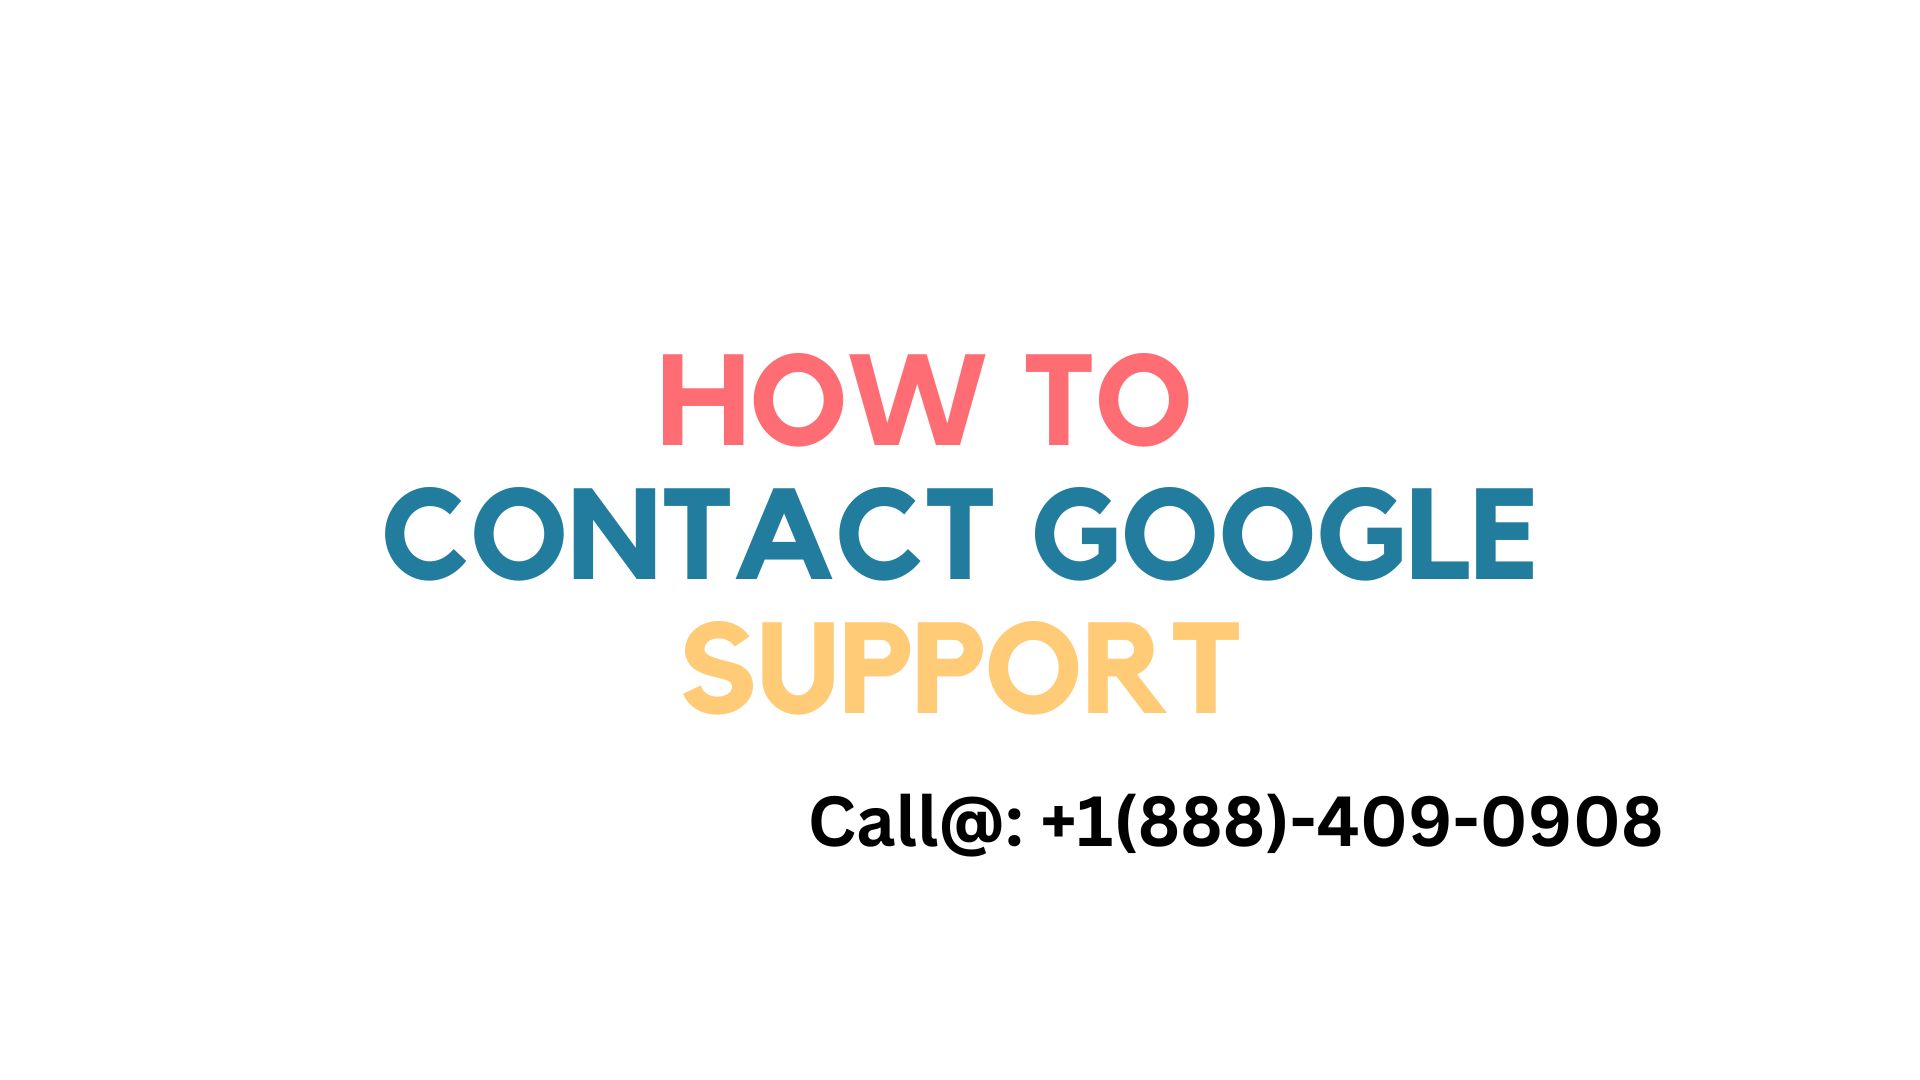 How To Contact Google Support